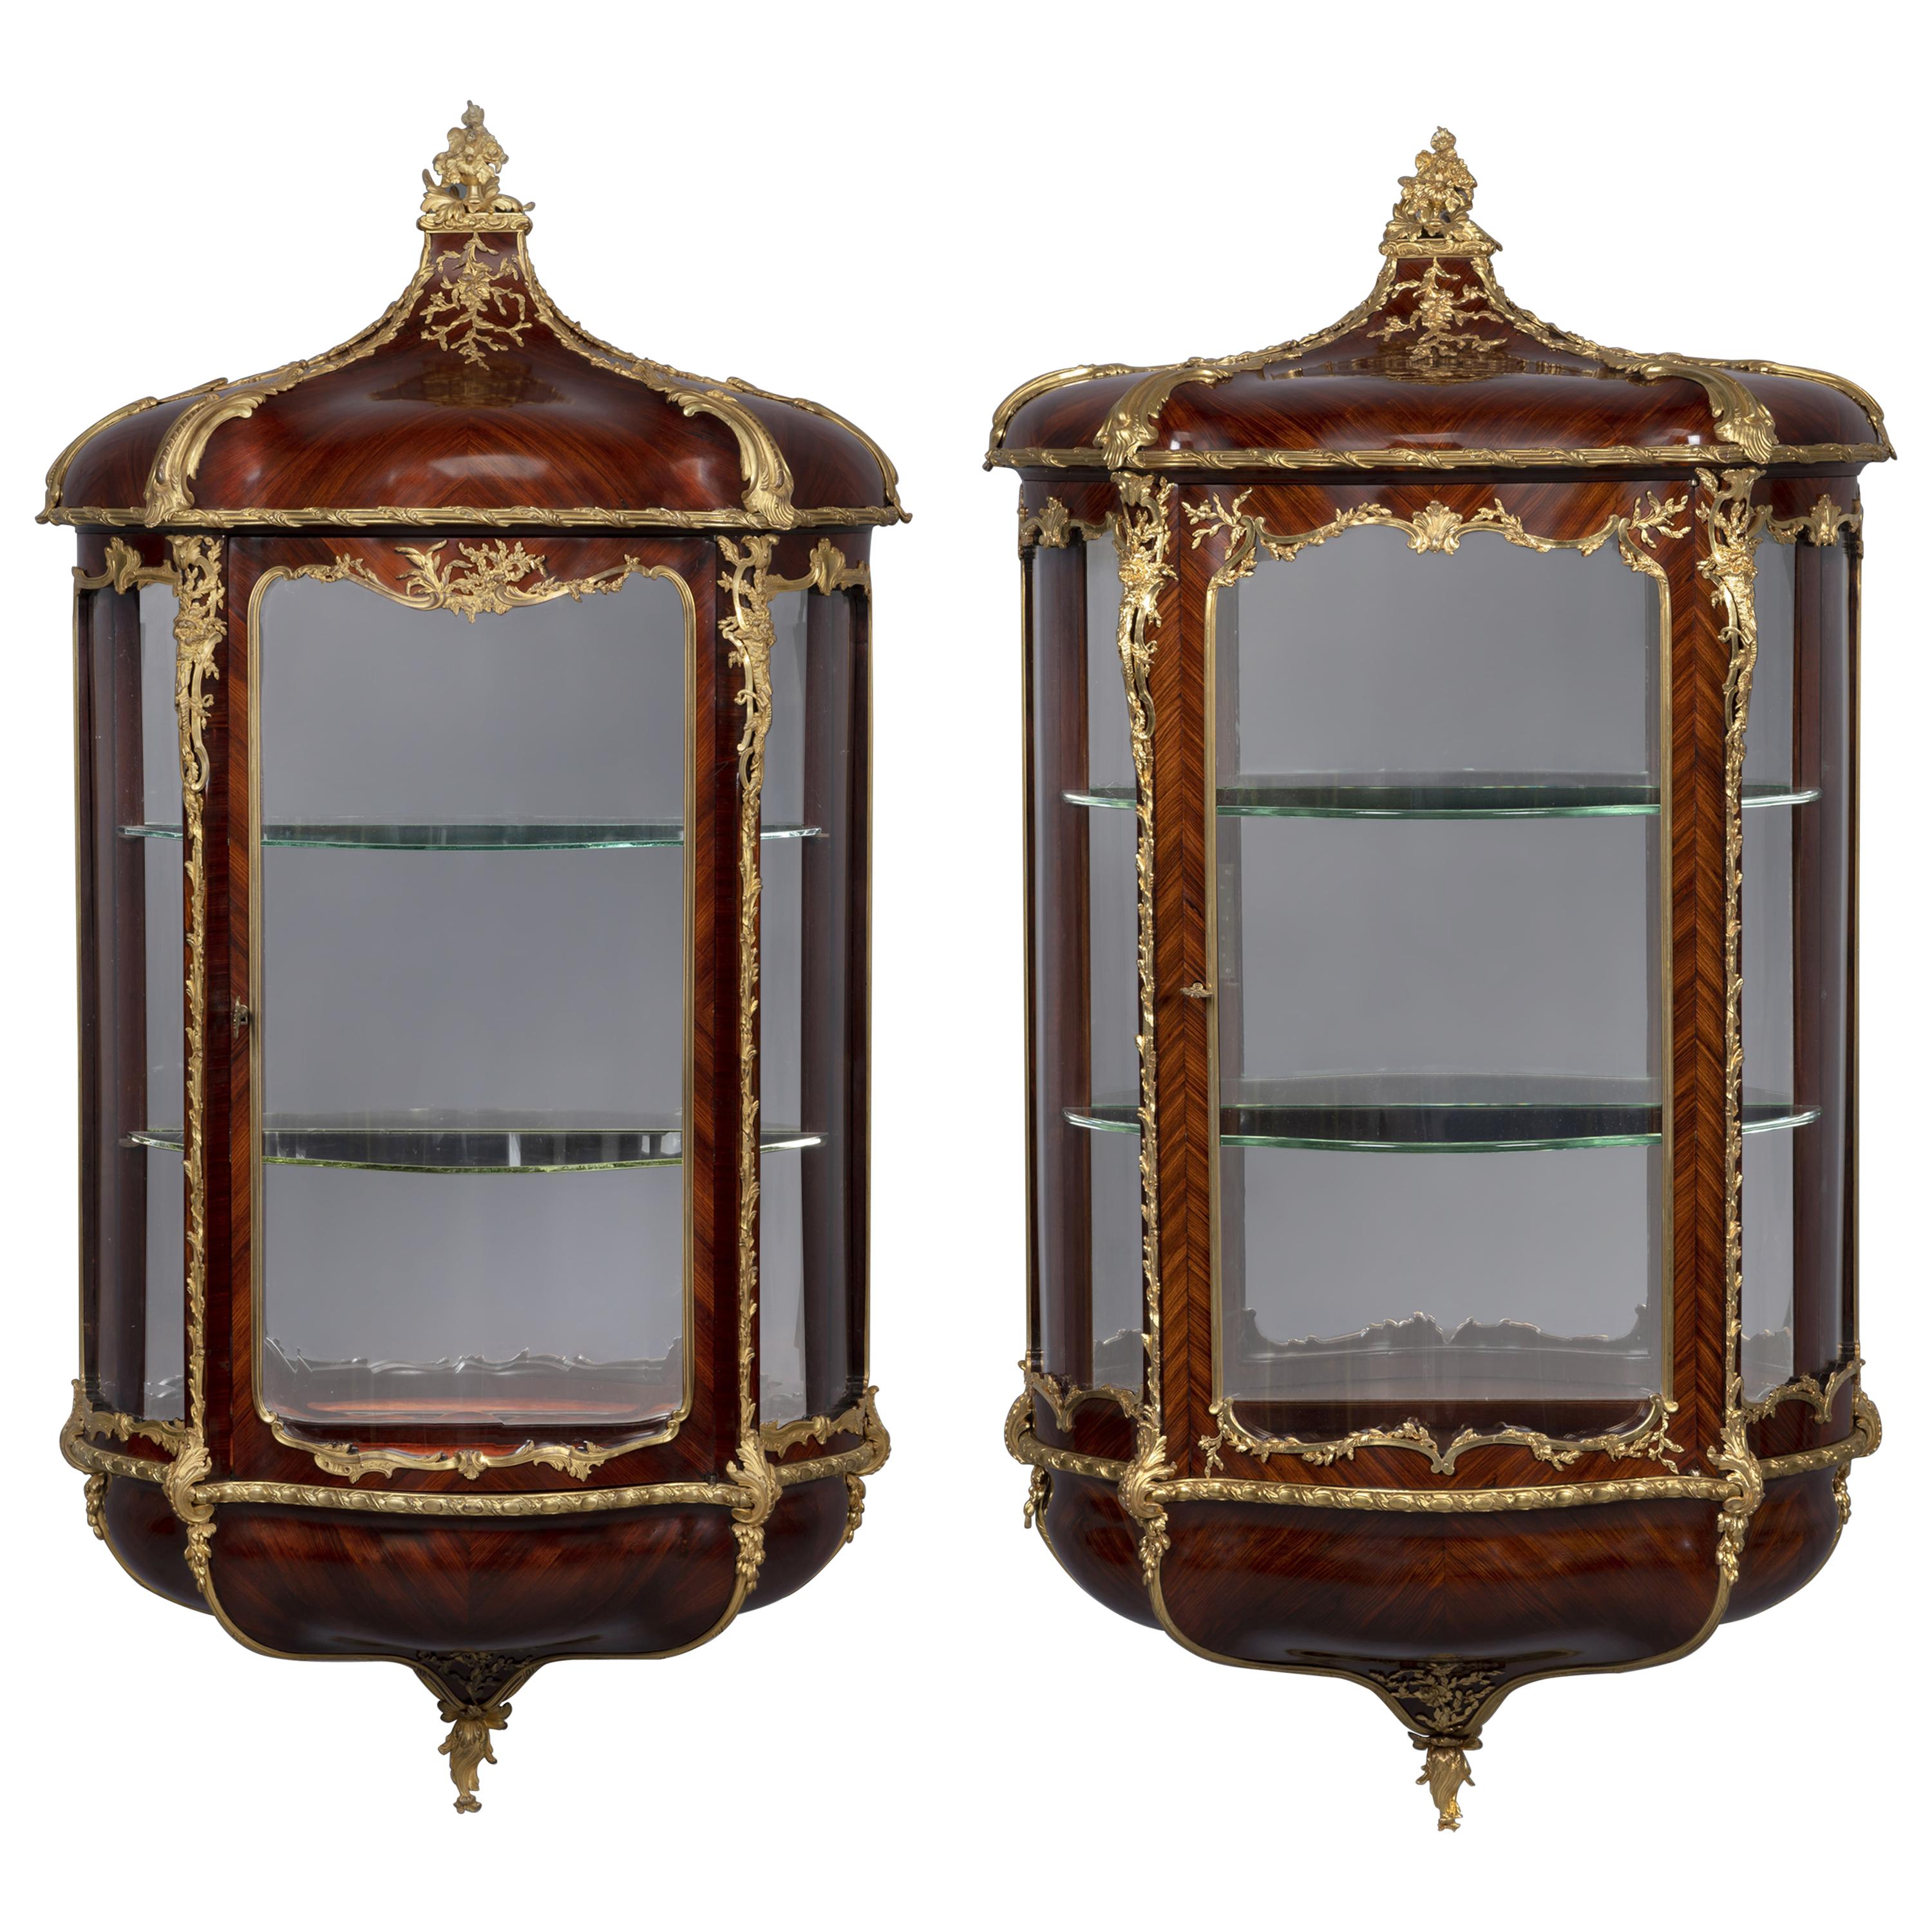 Rare Matched Pair of Louis XVI Style Wall Vitrines by Zwiener, circa 1890